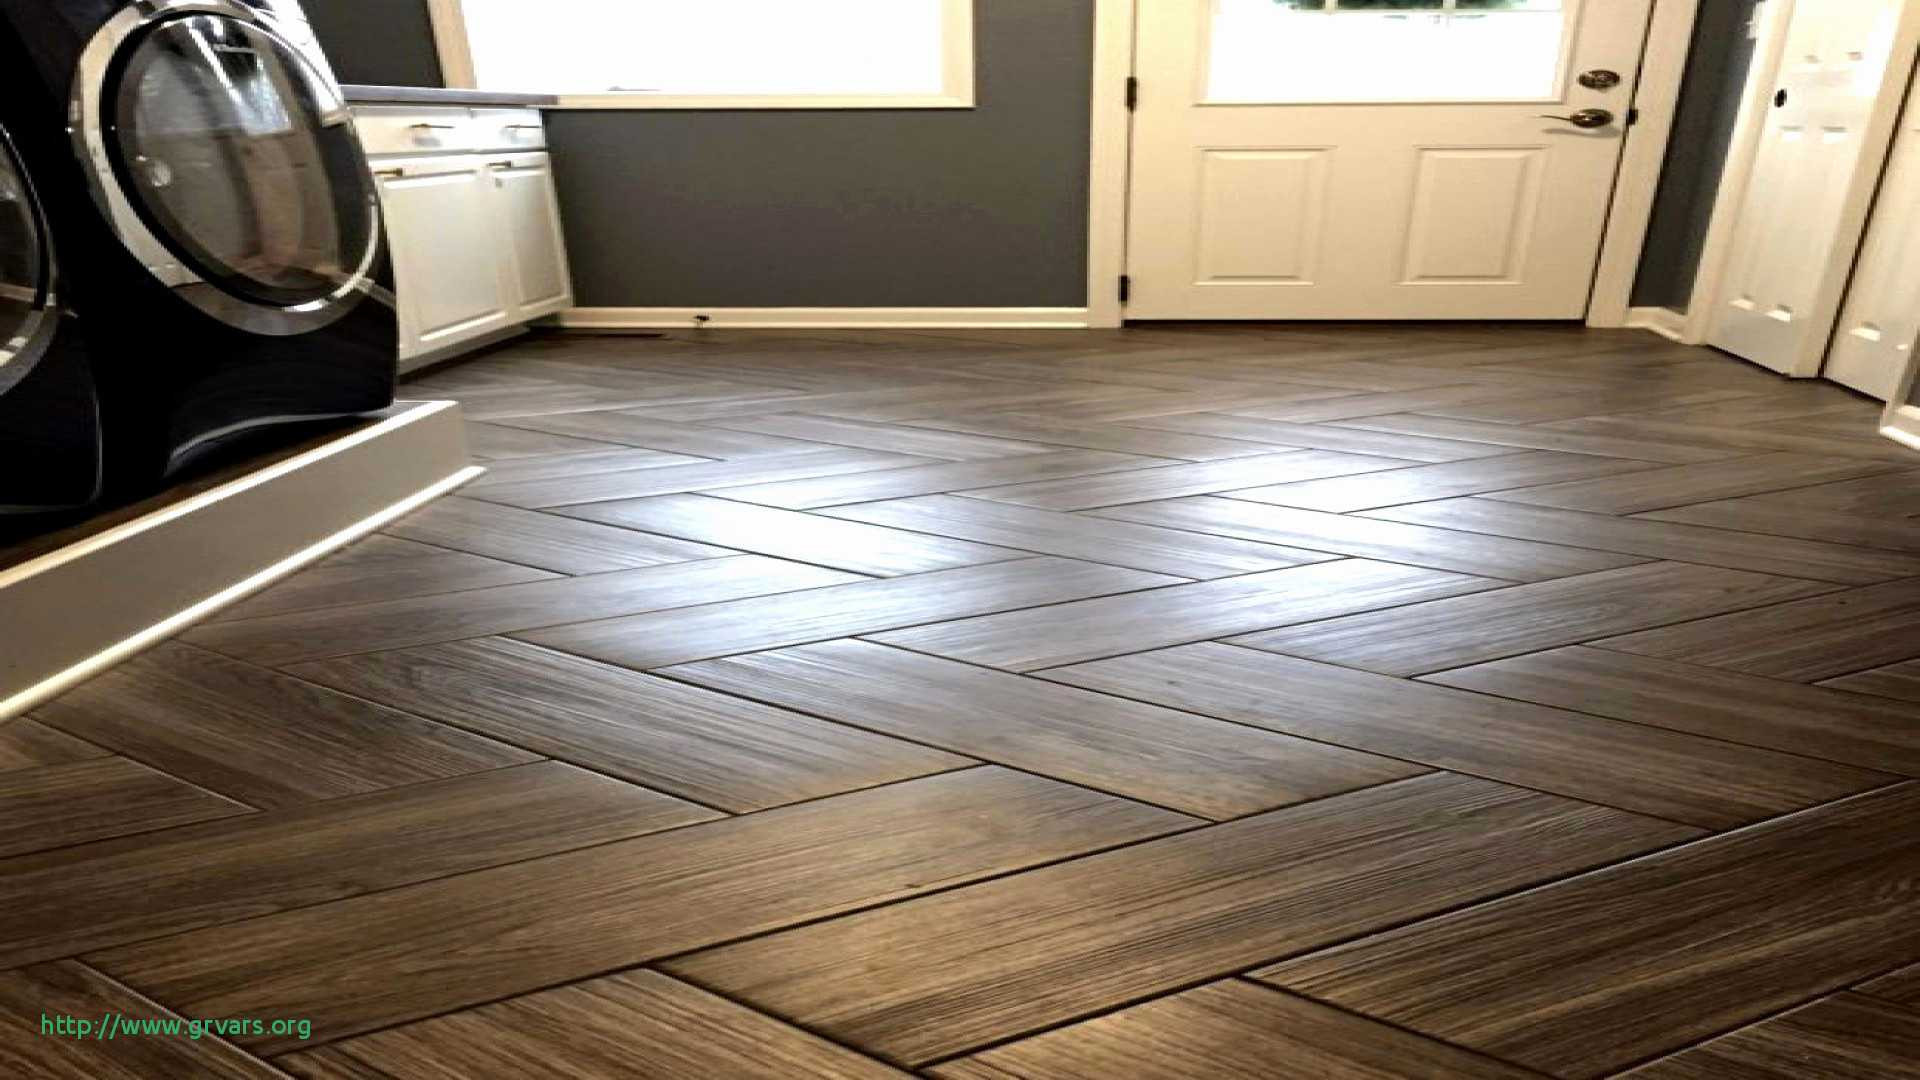 11 Awesome Hardwood Flooring Prices Calgary 2024 free download hardwood flooring prices calgary of 16 ac289lagant hardwood flooring depot calgary ideas blog regarding hardwood flooring depot calgary unique wood and tile floor cork flooring in an histori